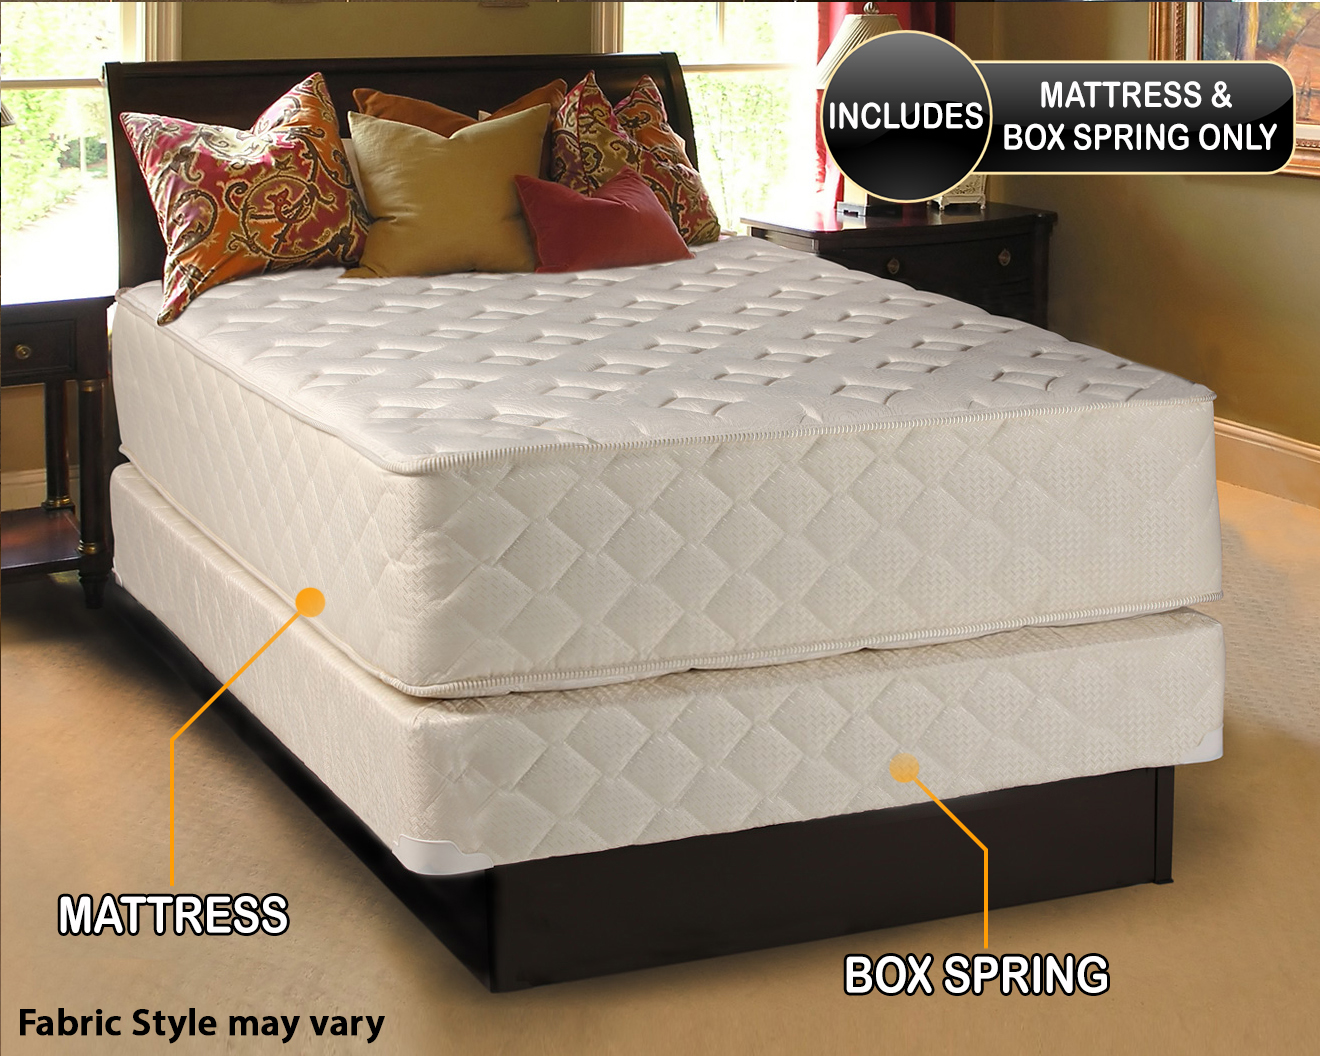 Longlasting Comfort Spinal Back Support DS USA Highlight Luxury Firm 39 Wx80 Lx14 H Twin XL Mattress /& Low 5 Height Box Spring Set Fully Assembled Innerspring Coils